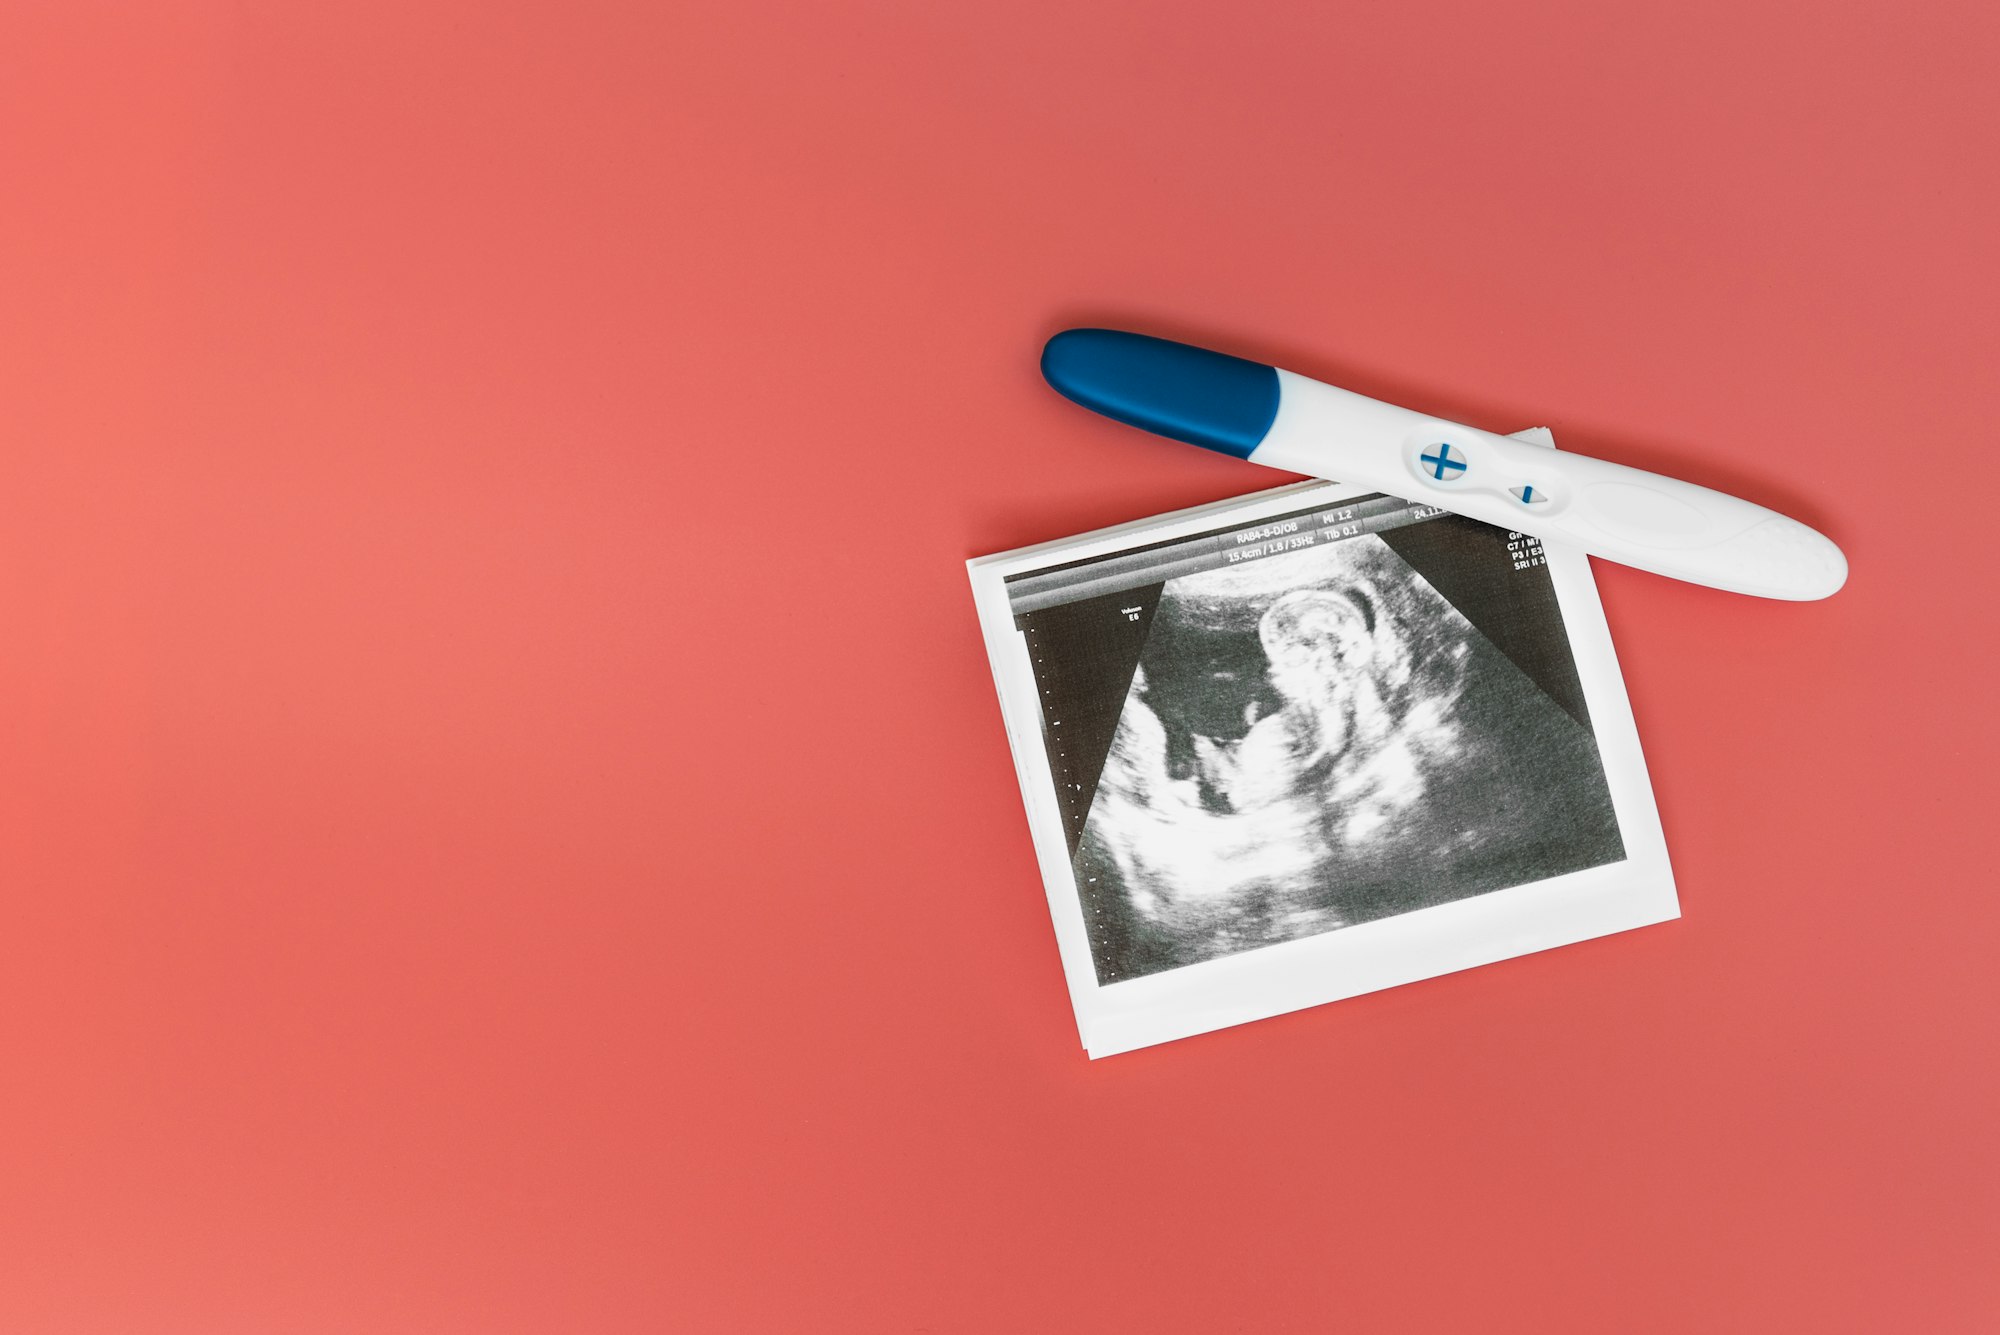 A positive pregnancy test and ultrasound photo on a pink background